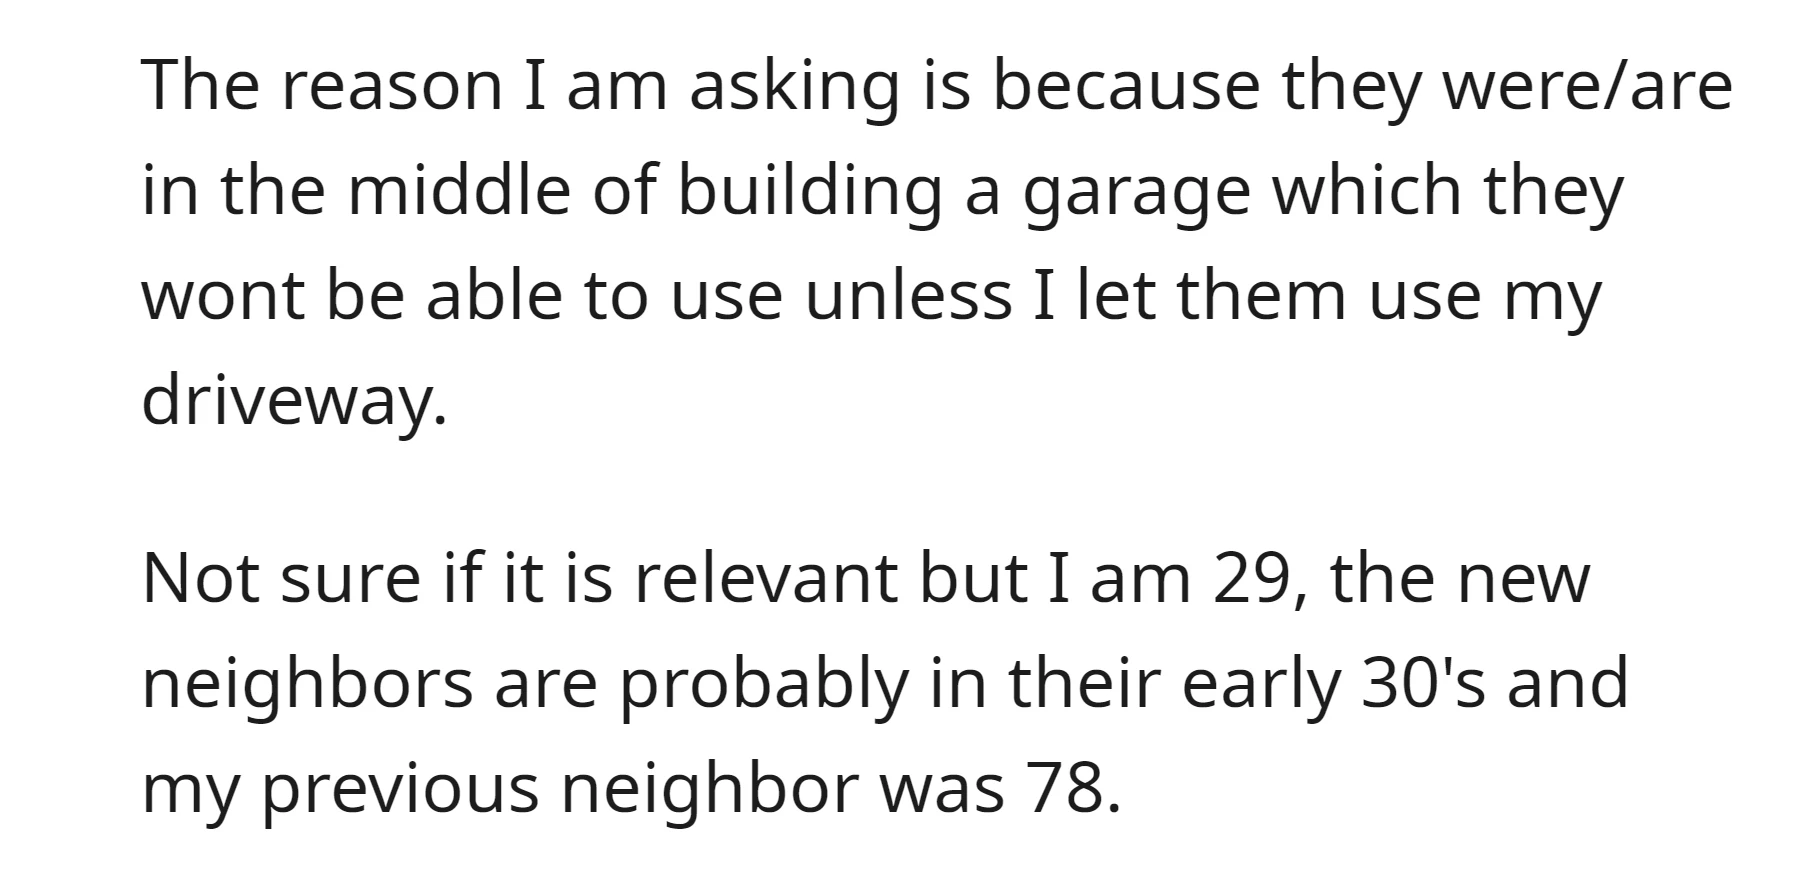 OP is unsure whether to let their new neighbors use their driveway to complete a garage construction